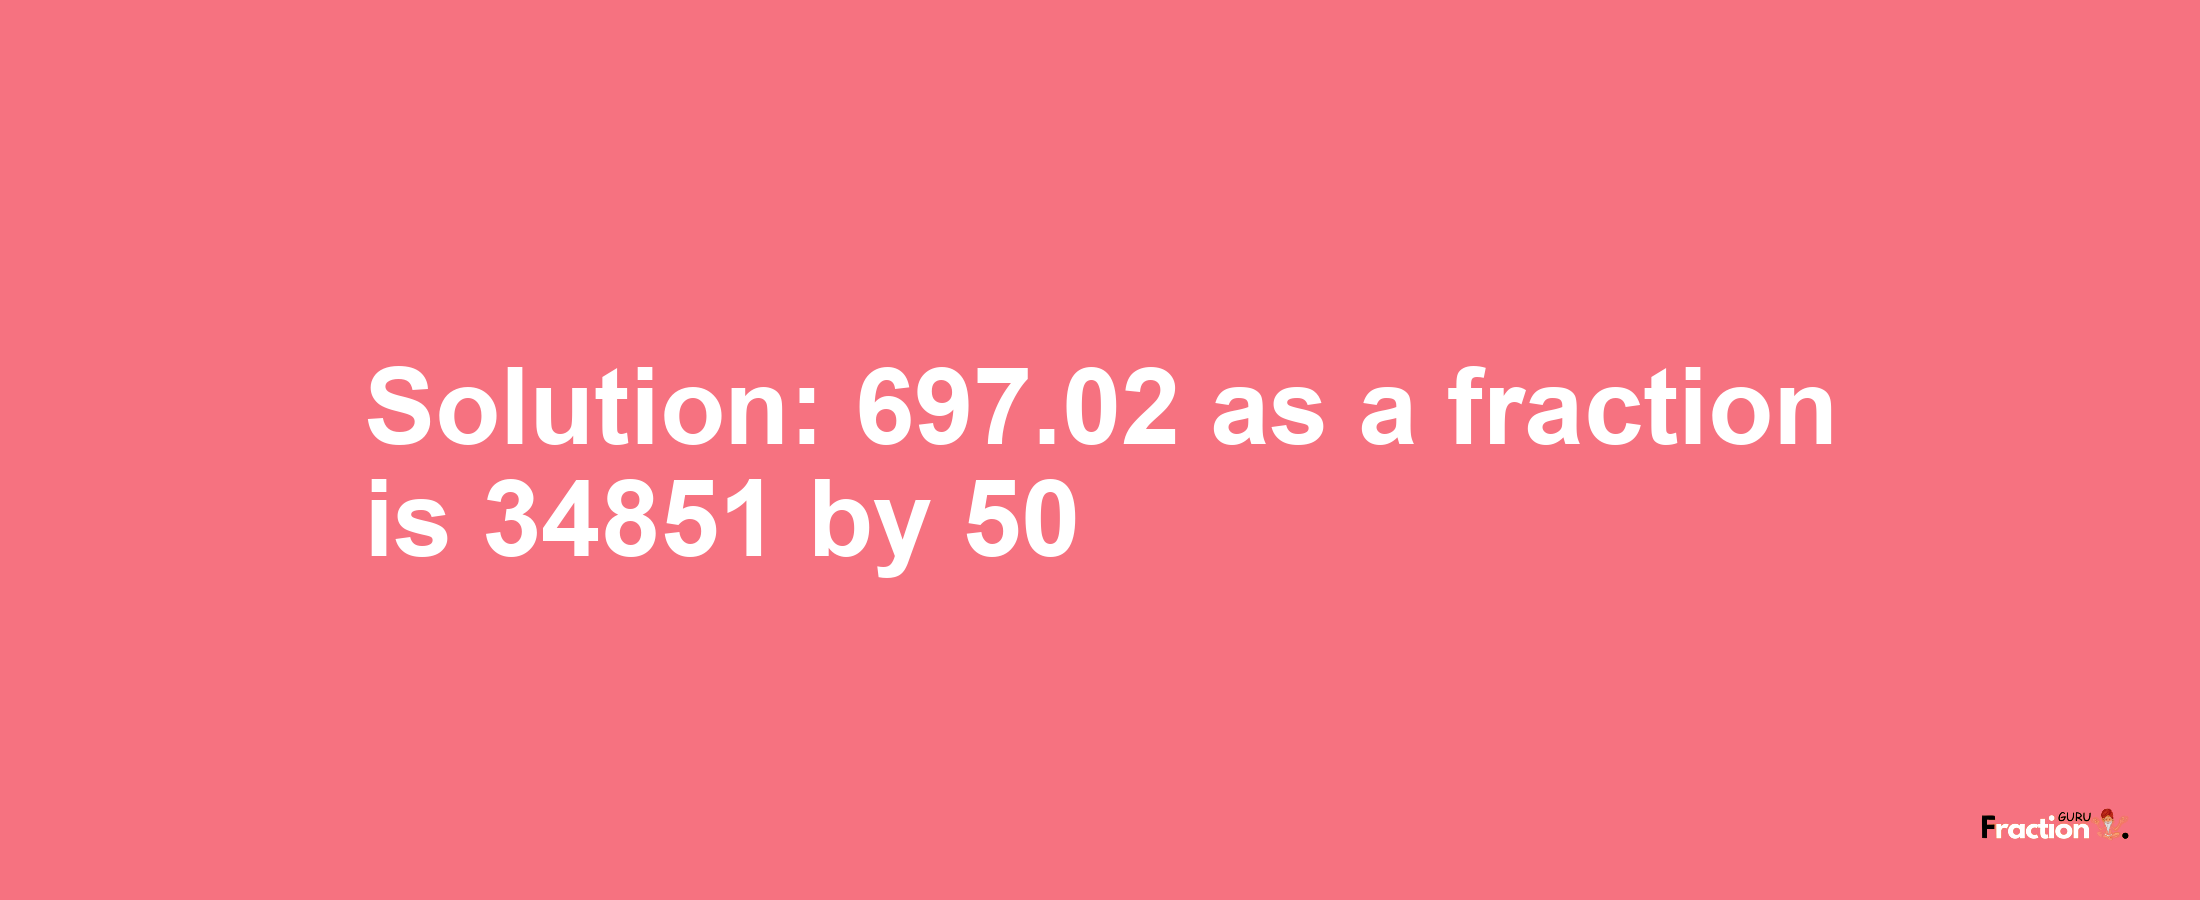 Solution:697.02 as a fraction is 34851/50